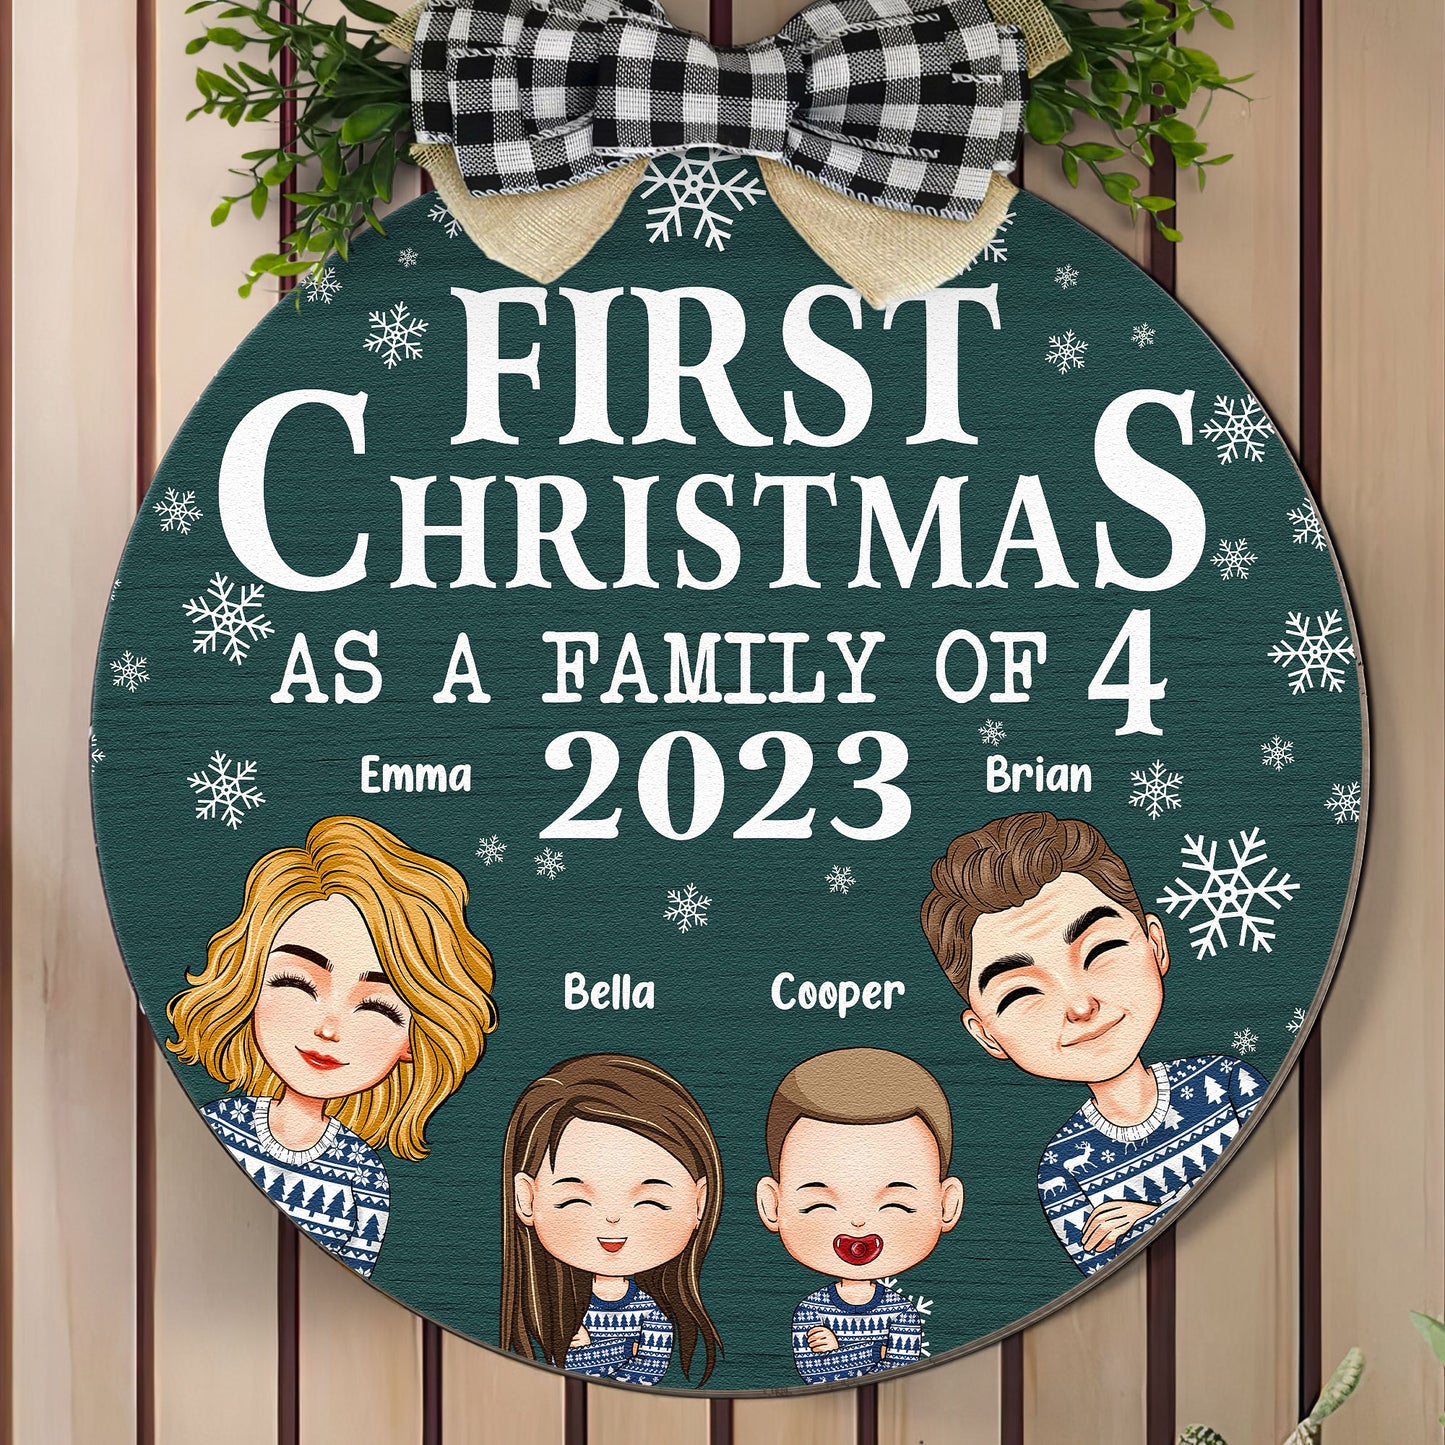 First Christmas As A Family With Children - Personalized Wood Wreath